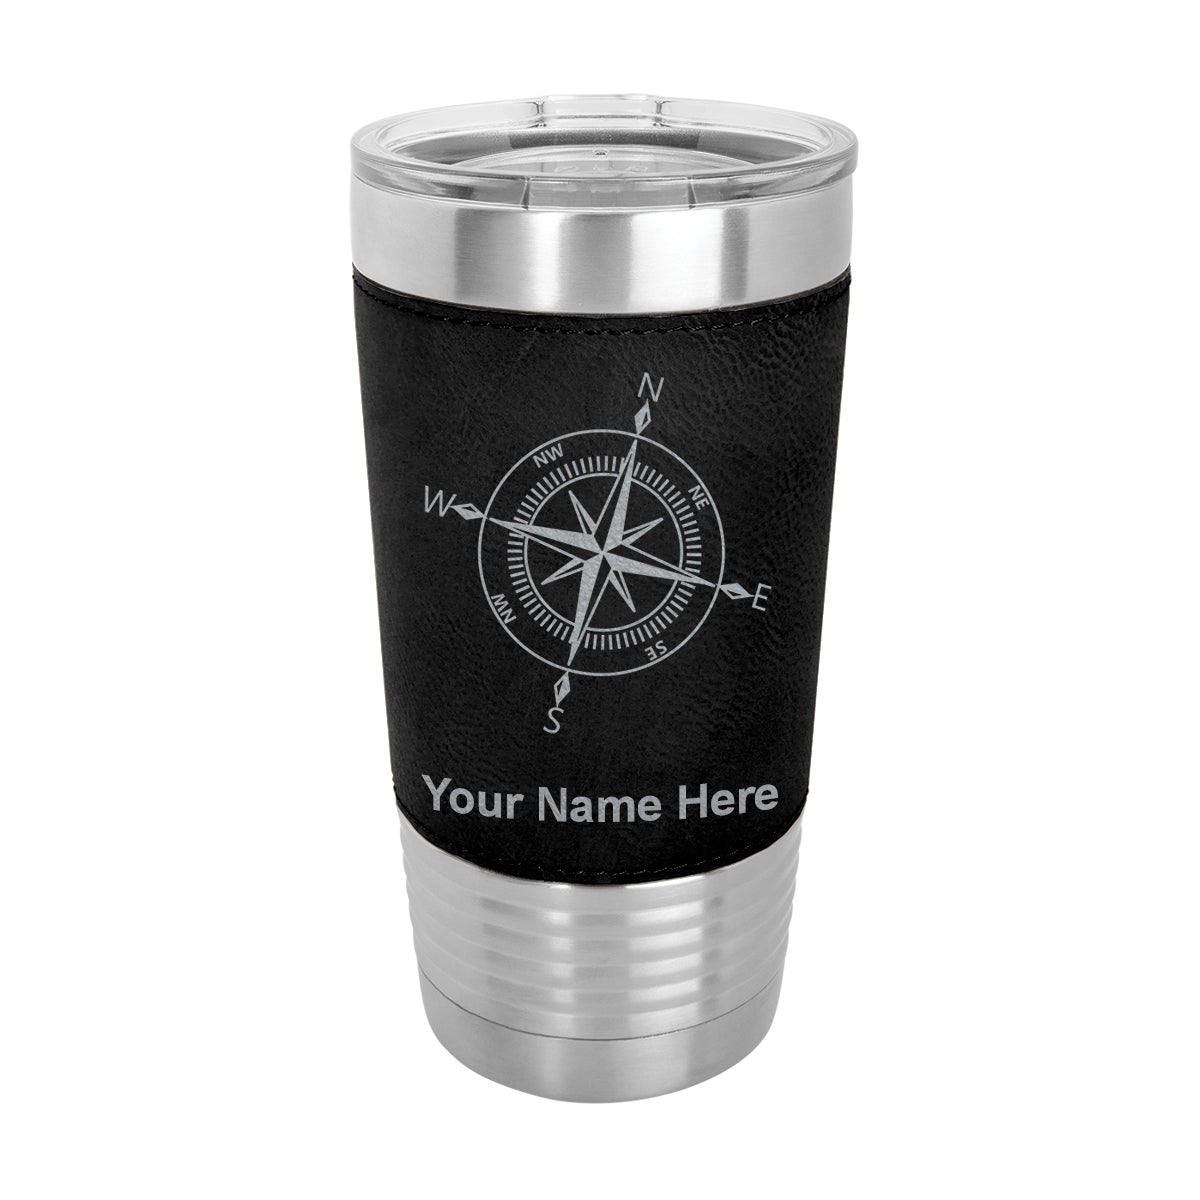 20oz Faux Leather Tumbler Mug, Compass Rose, Personalized Engraving Included - LaserGram Custom Engraved Gifts